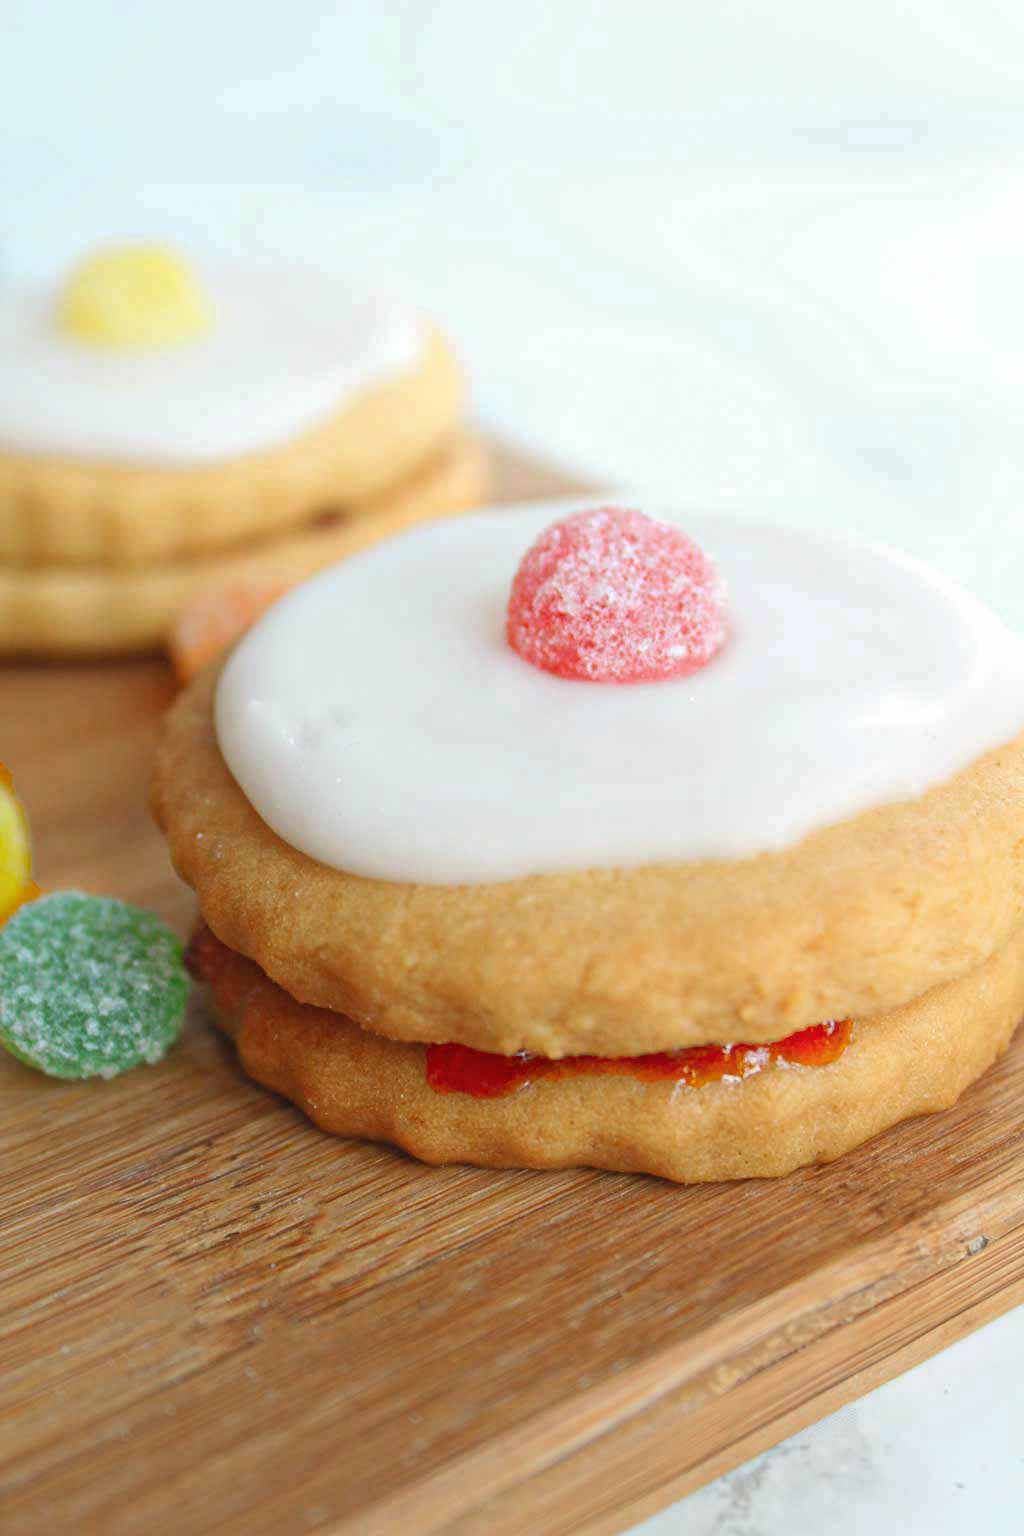 a vegan Empire biscuit with a red Jelly Tot on top